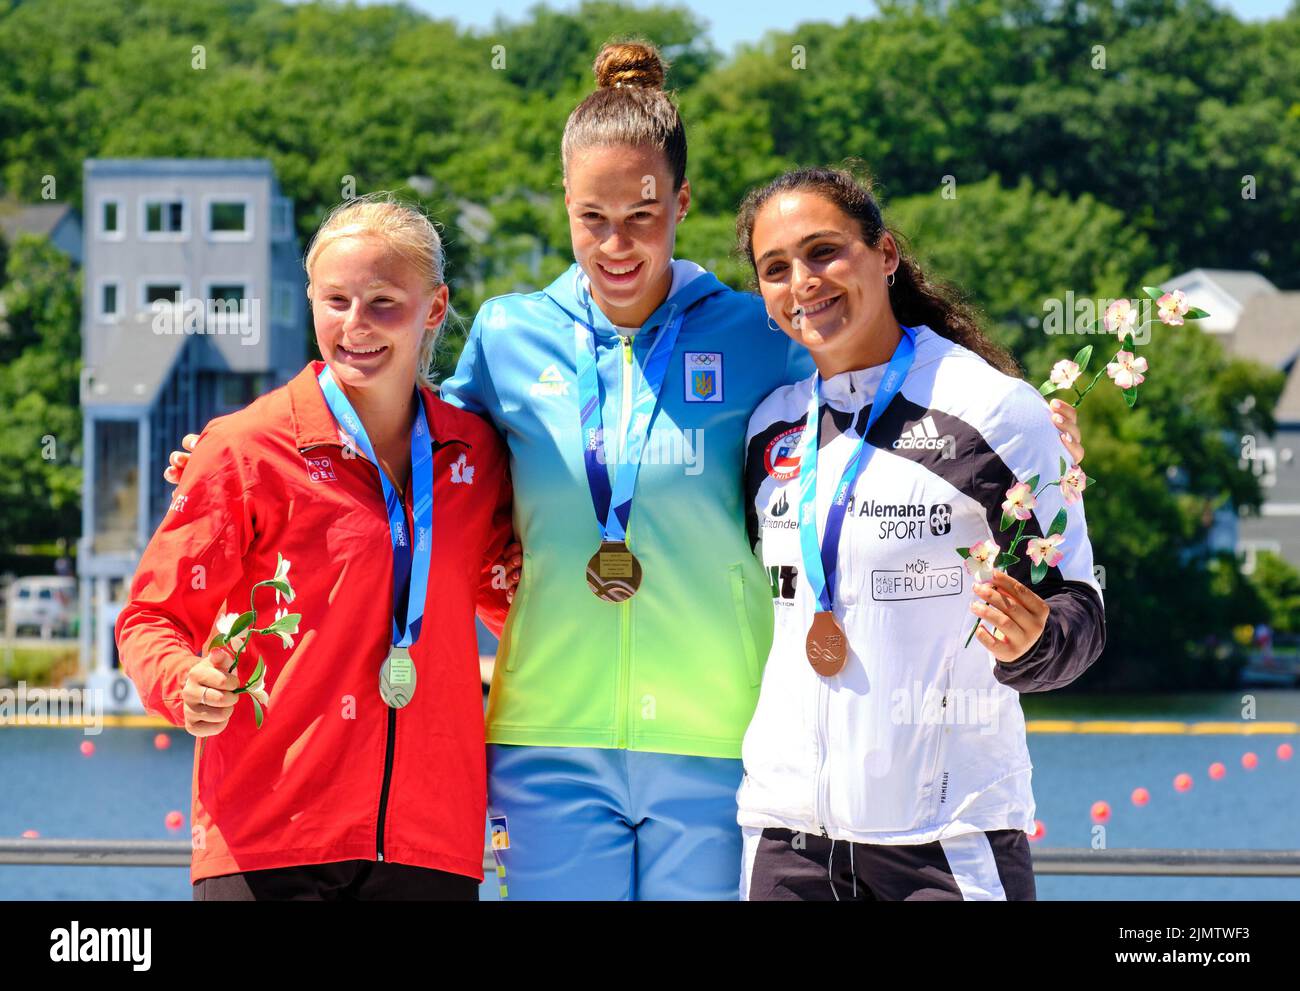 Dartmouth, Canada. August 7th, 2022. Women C2 500m World Championship Podium, Champion Liudmyla Luzan from Ukraine takes her second Gold of the event, Sophia Jensen from Canada takes Silver, and Maria Mailliard from Chile taking the Bronze. The 2022 ICF Canoe Sprint and Paracanoe World Championships takes place on Lake Banook in Dartmouth (Halifax). Credit: meanderingemu/Alamy Live News Stock Photo